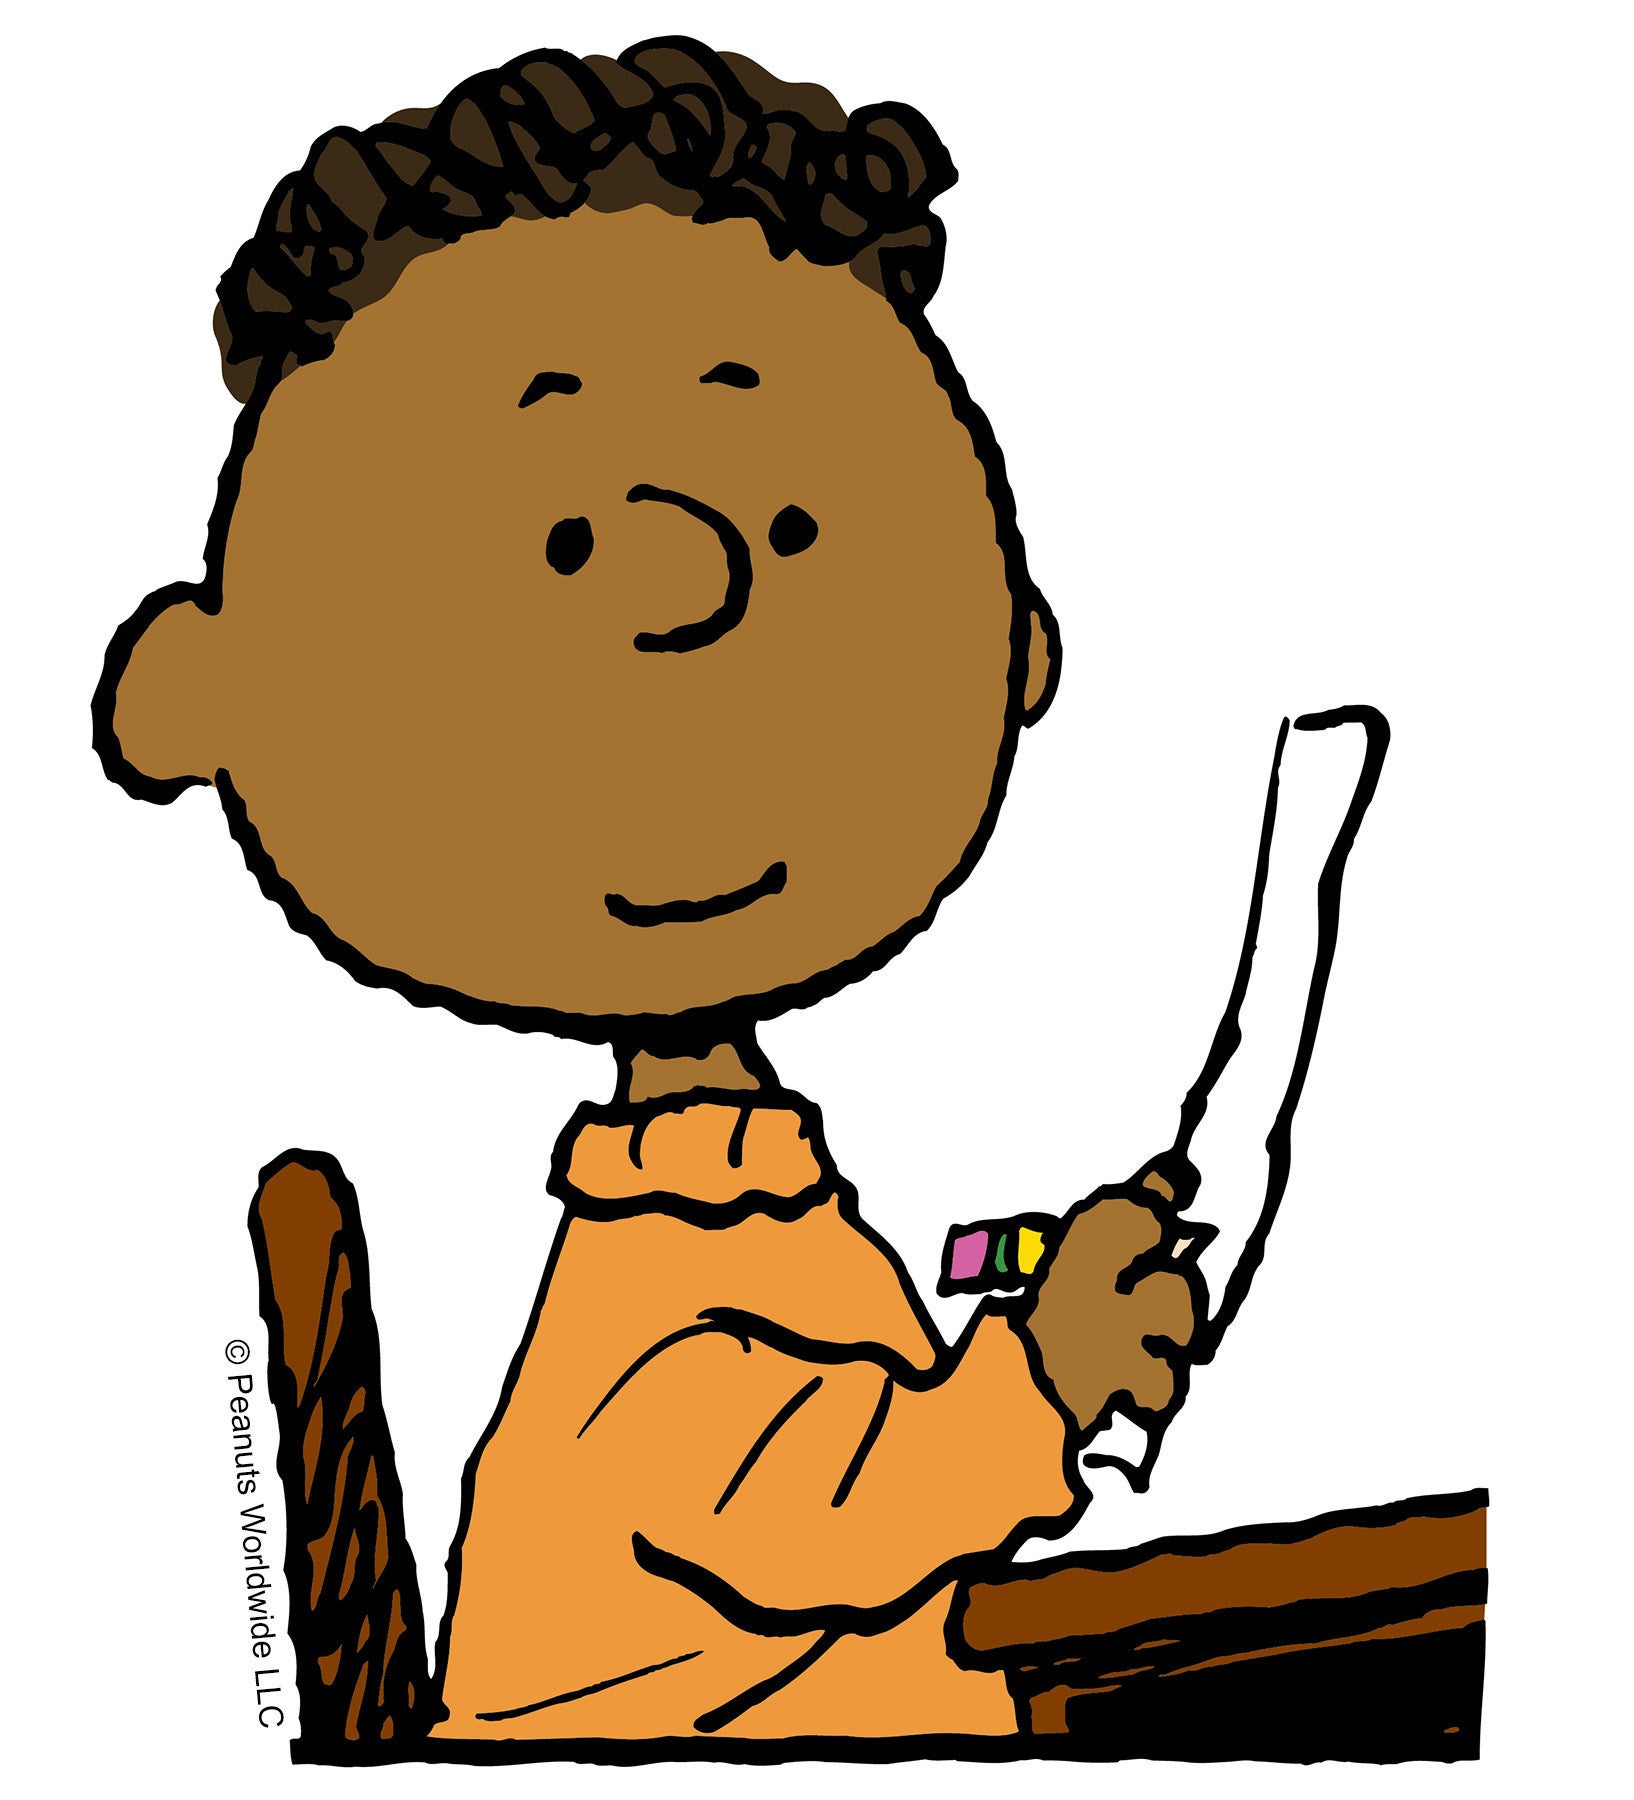 A New Project Inspired By 'Peanuts' Character Franklin Will Support Black Animators